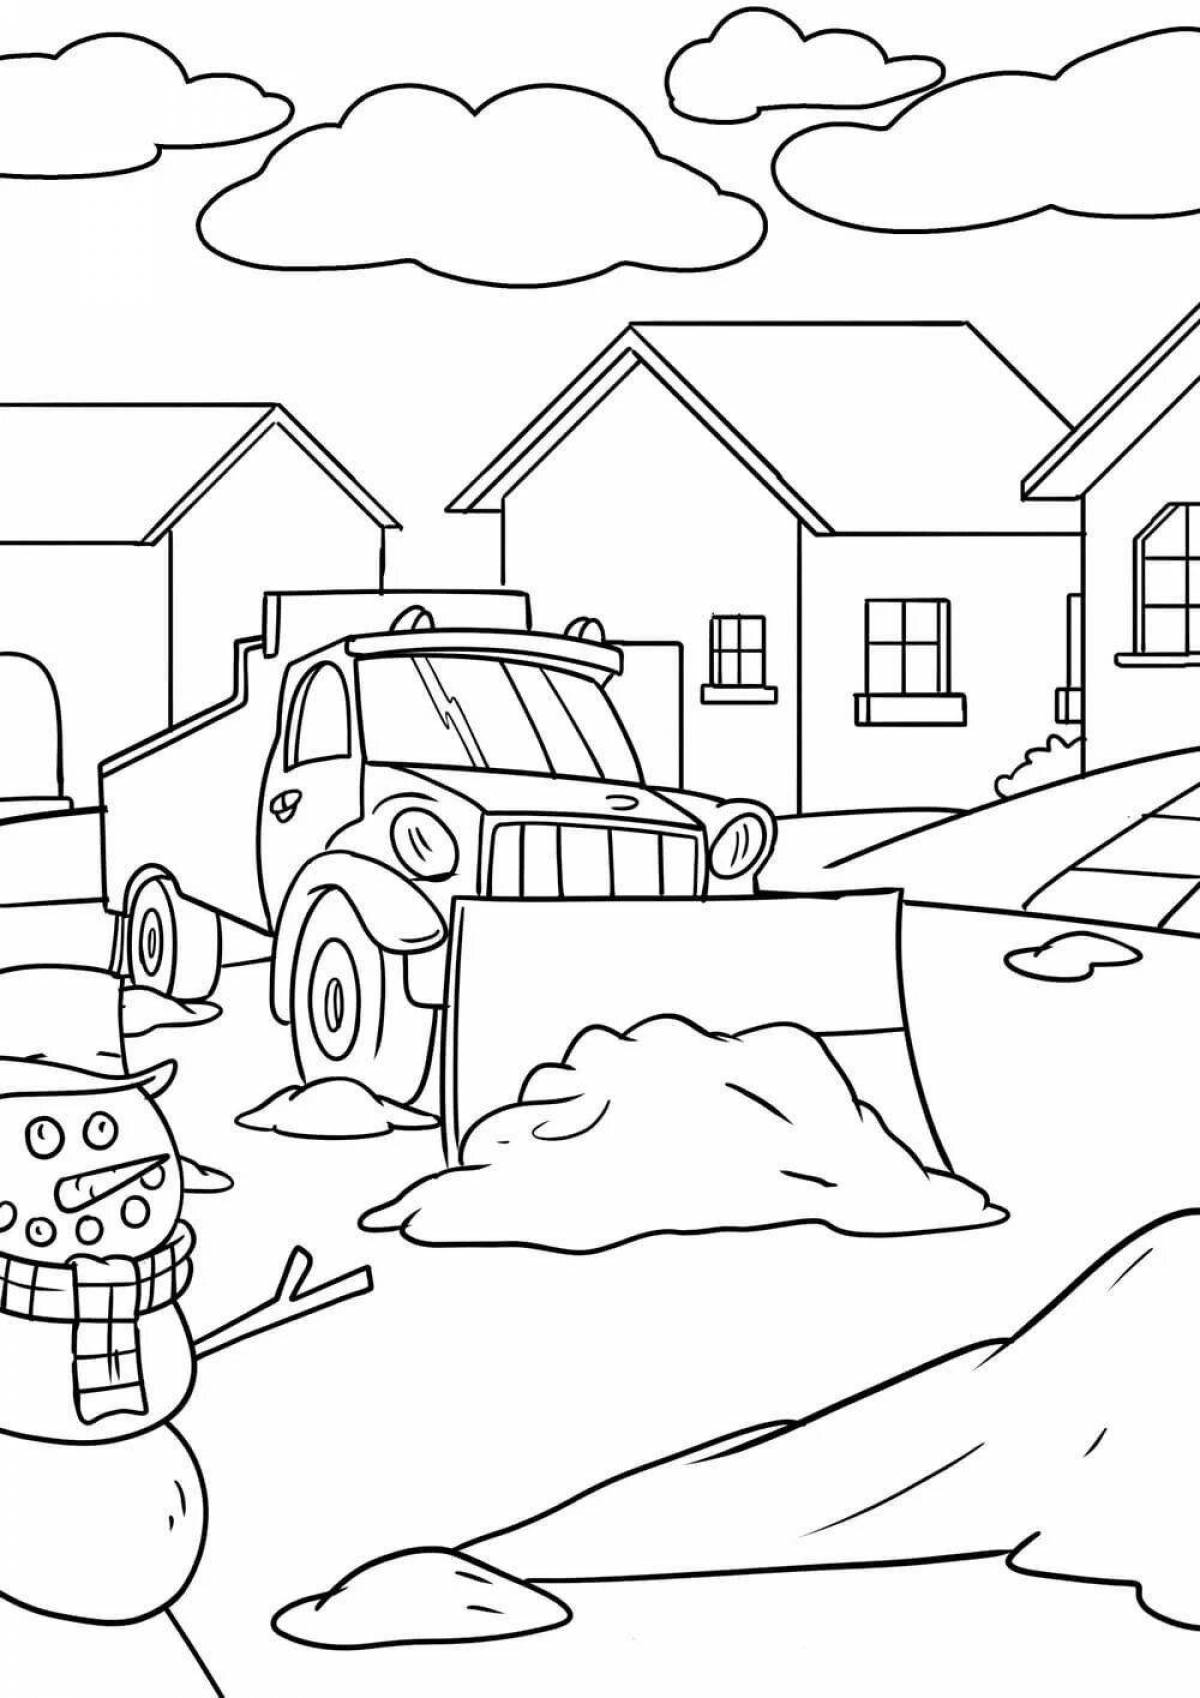 Large winter farming coloring page